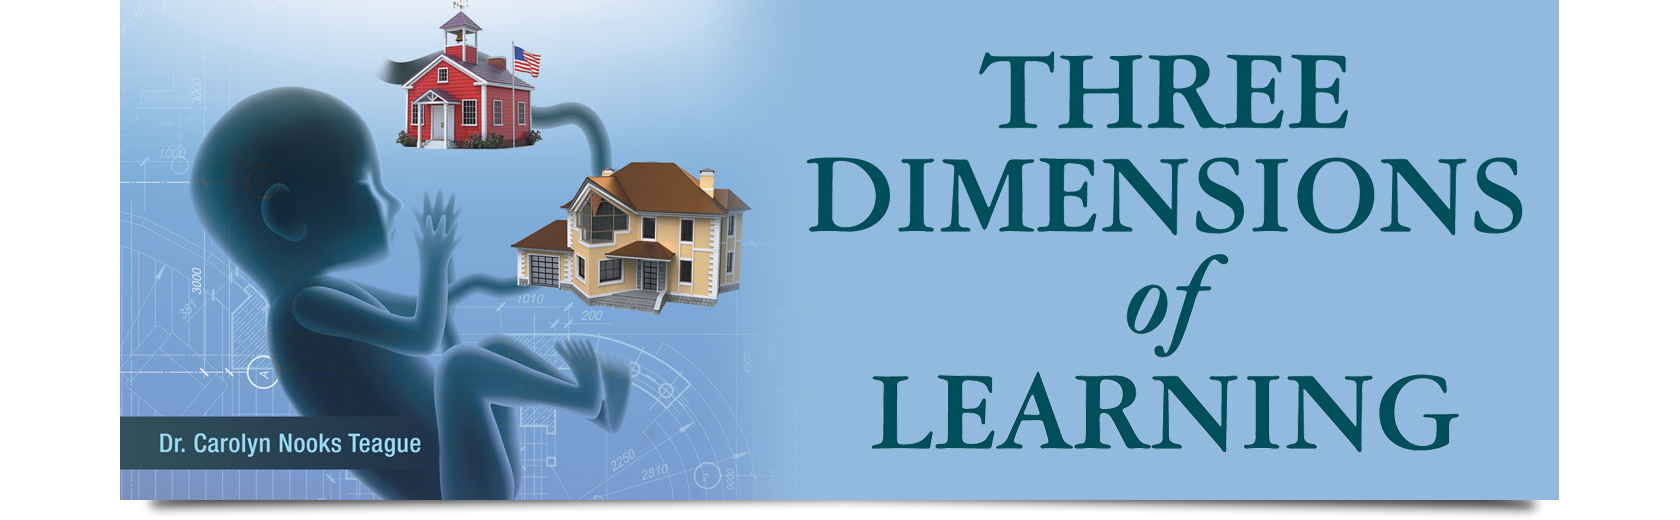 three-dimensions-of-learning-dr-carolyn-nooks-teague